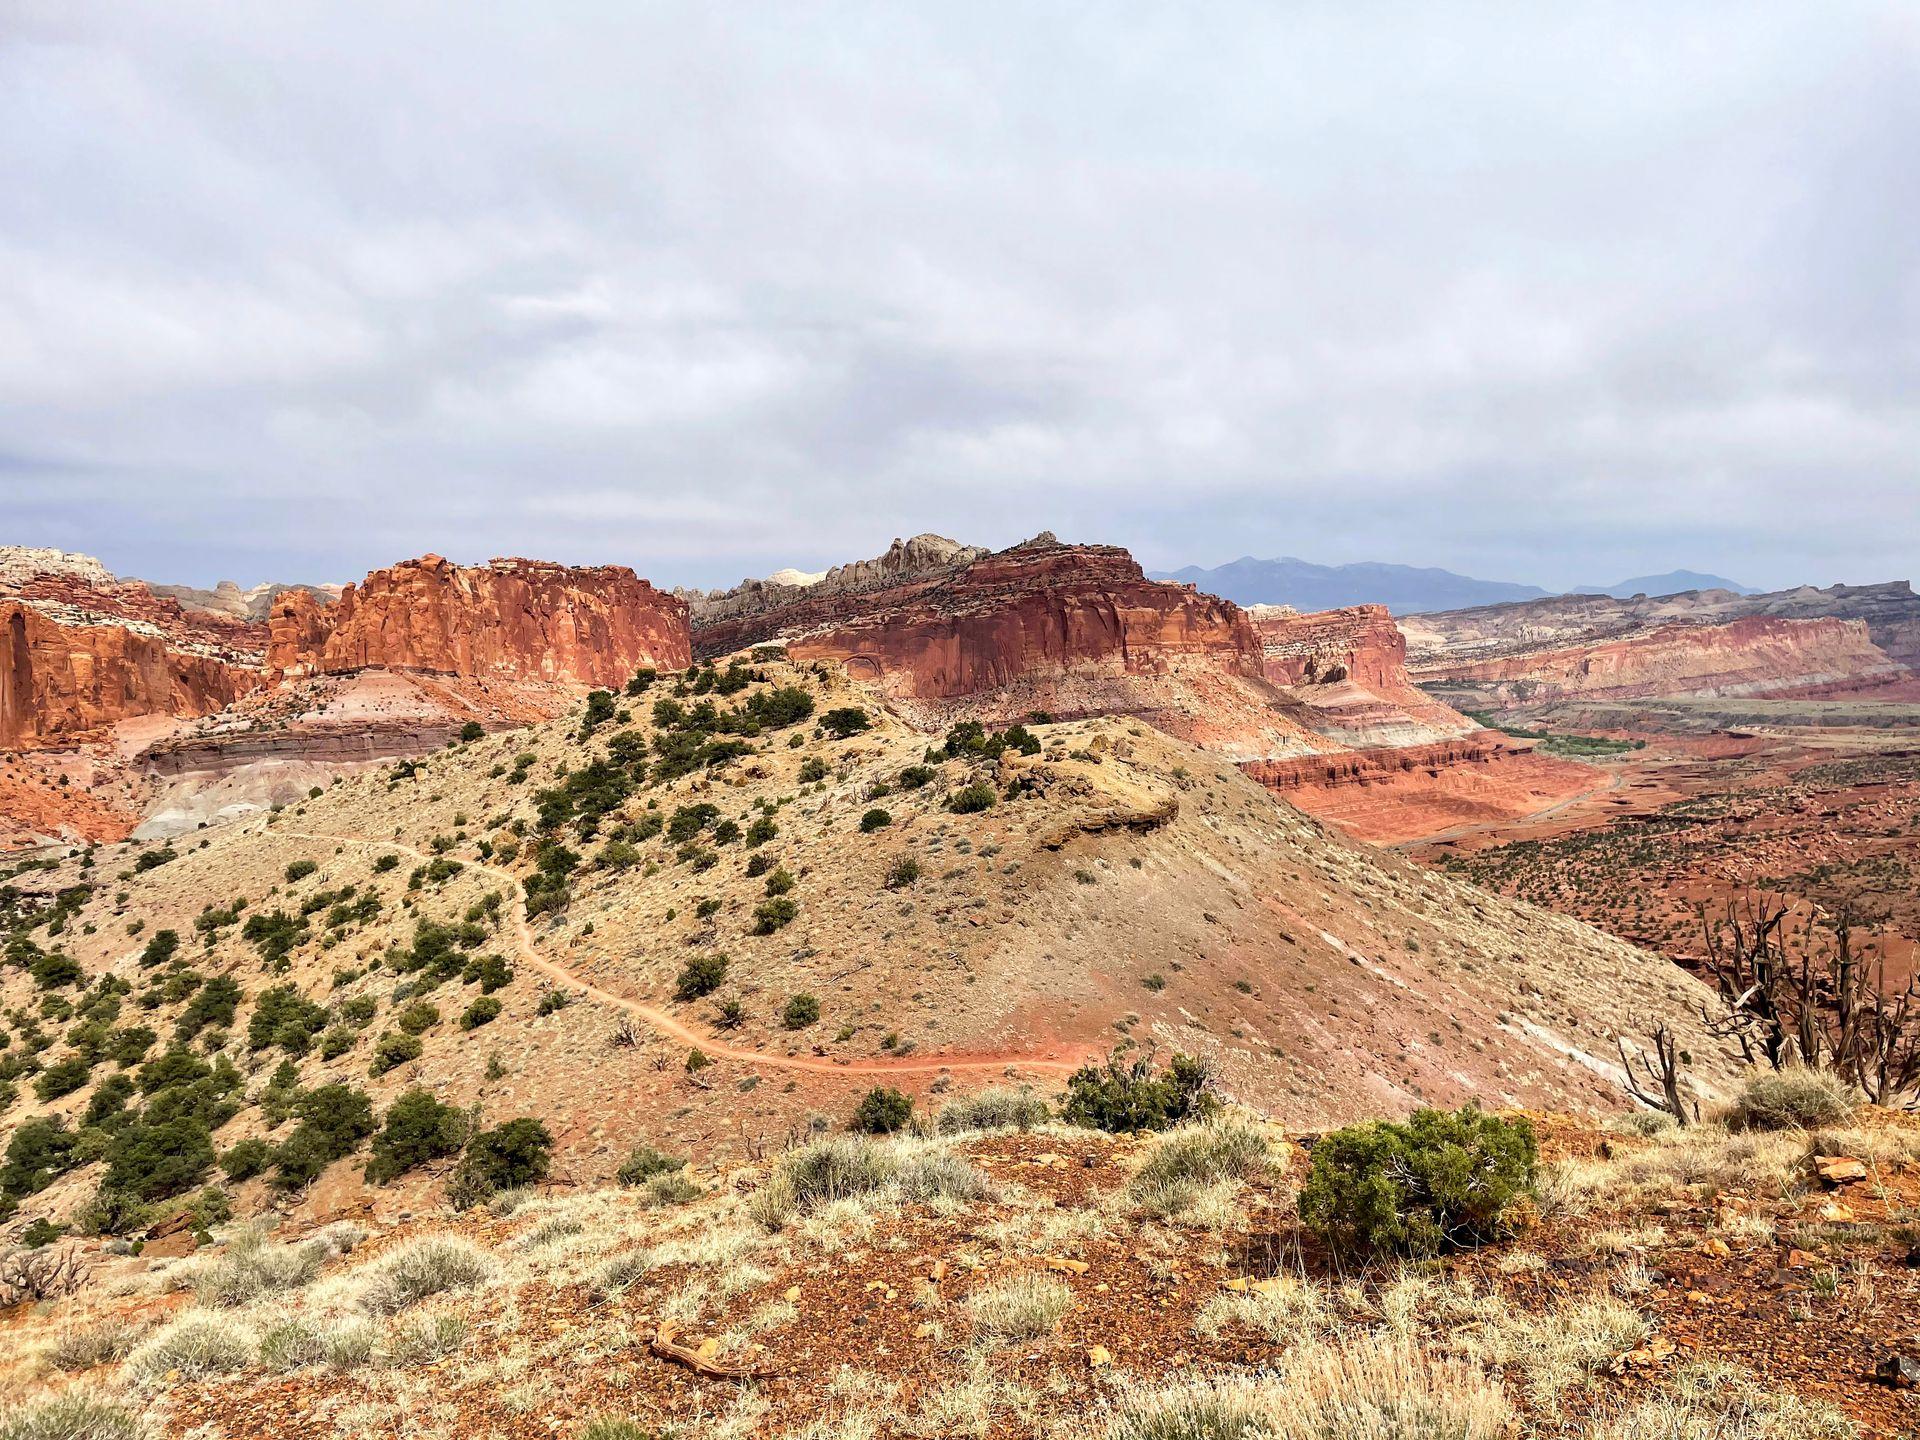 A view of the Water Pocket Fold at Capitol Reef. Orange cliffs look as if they are tiled up in the air.